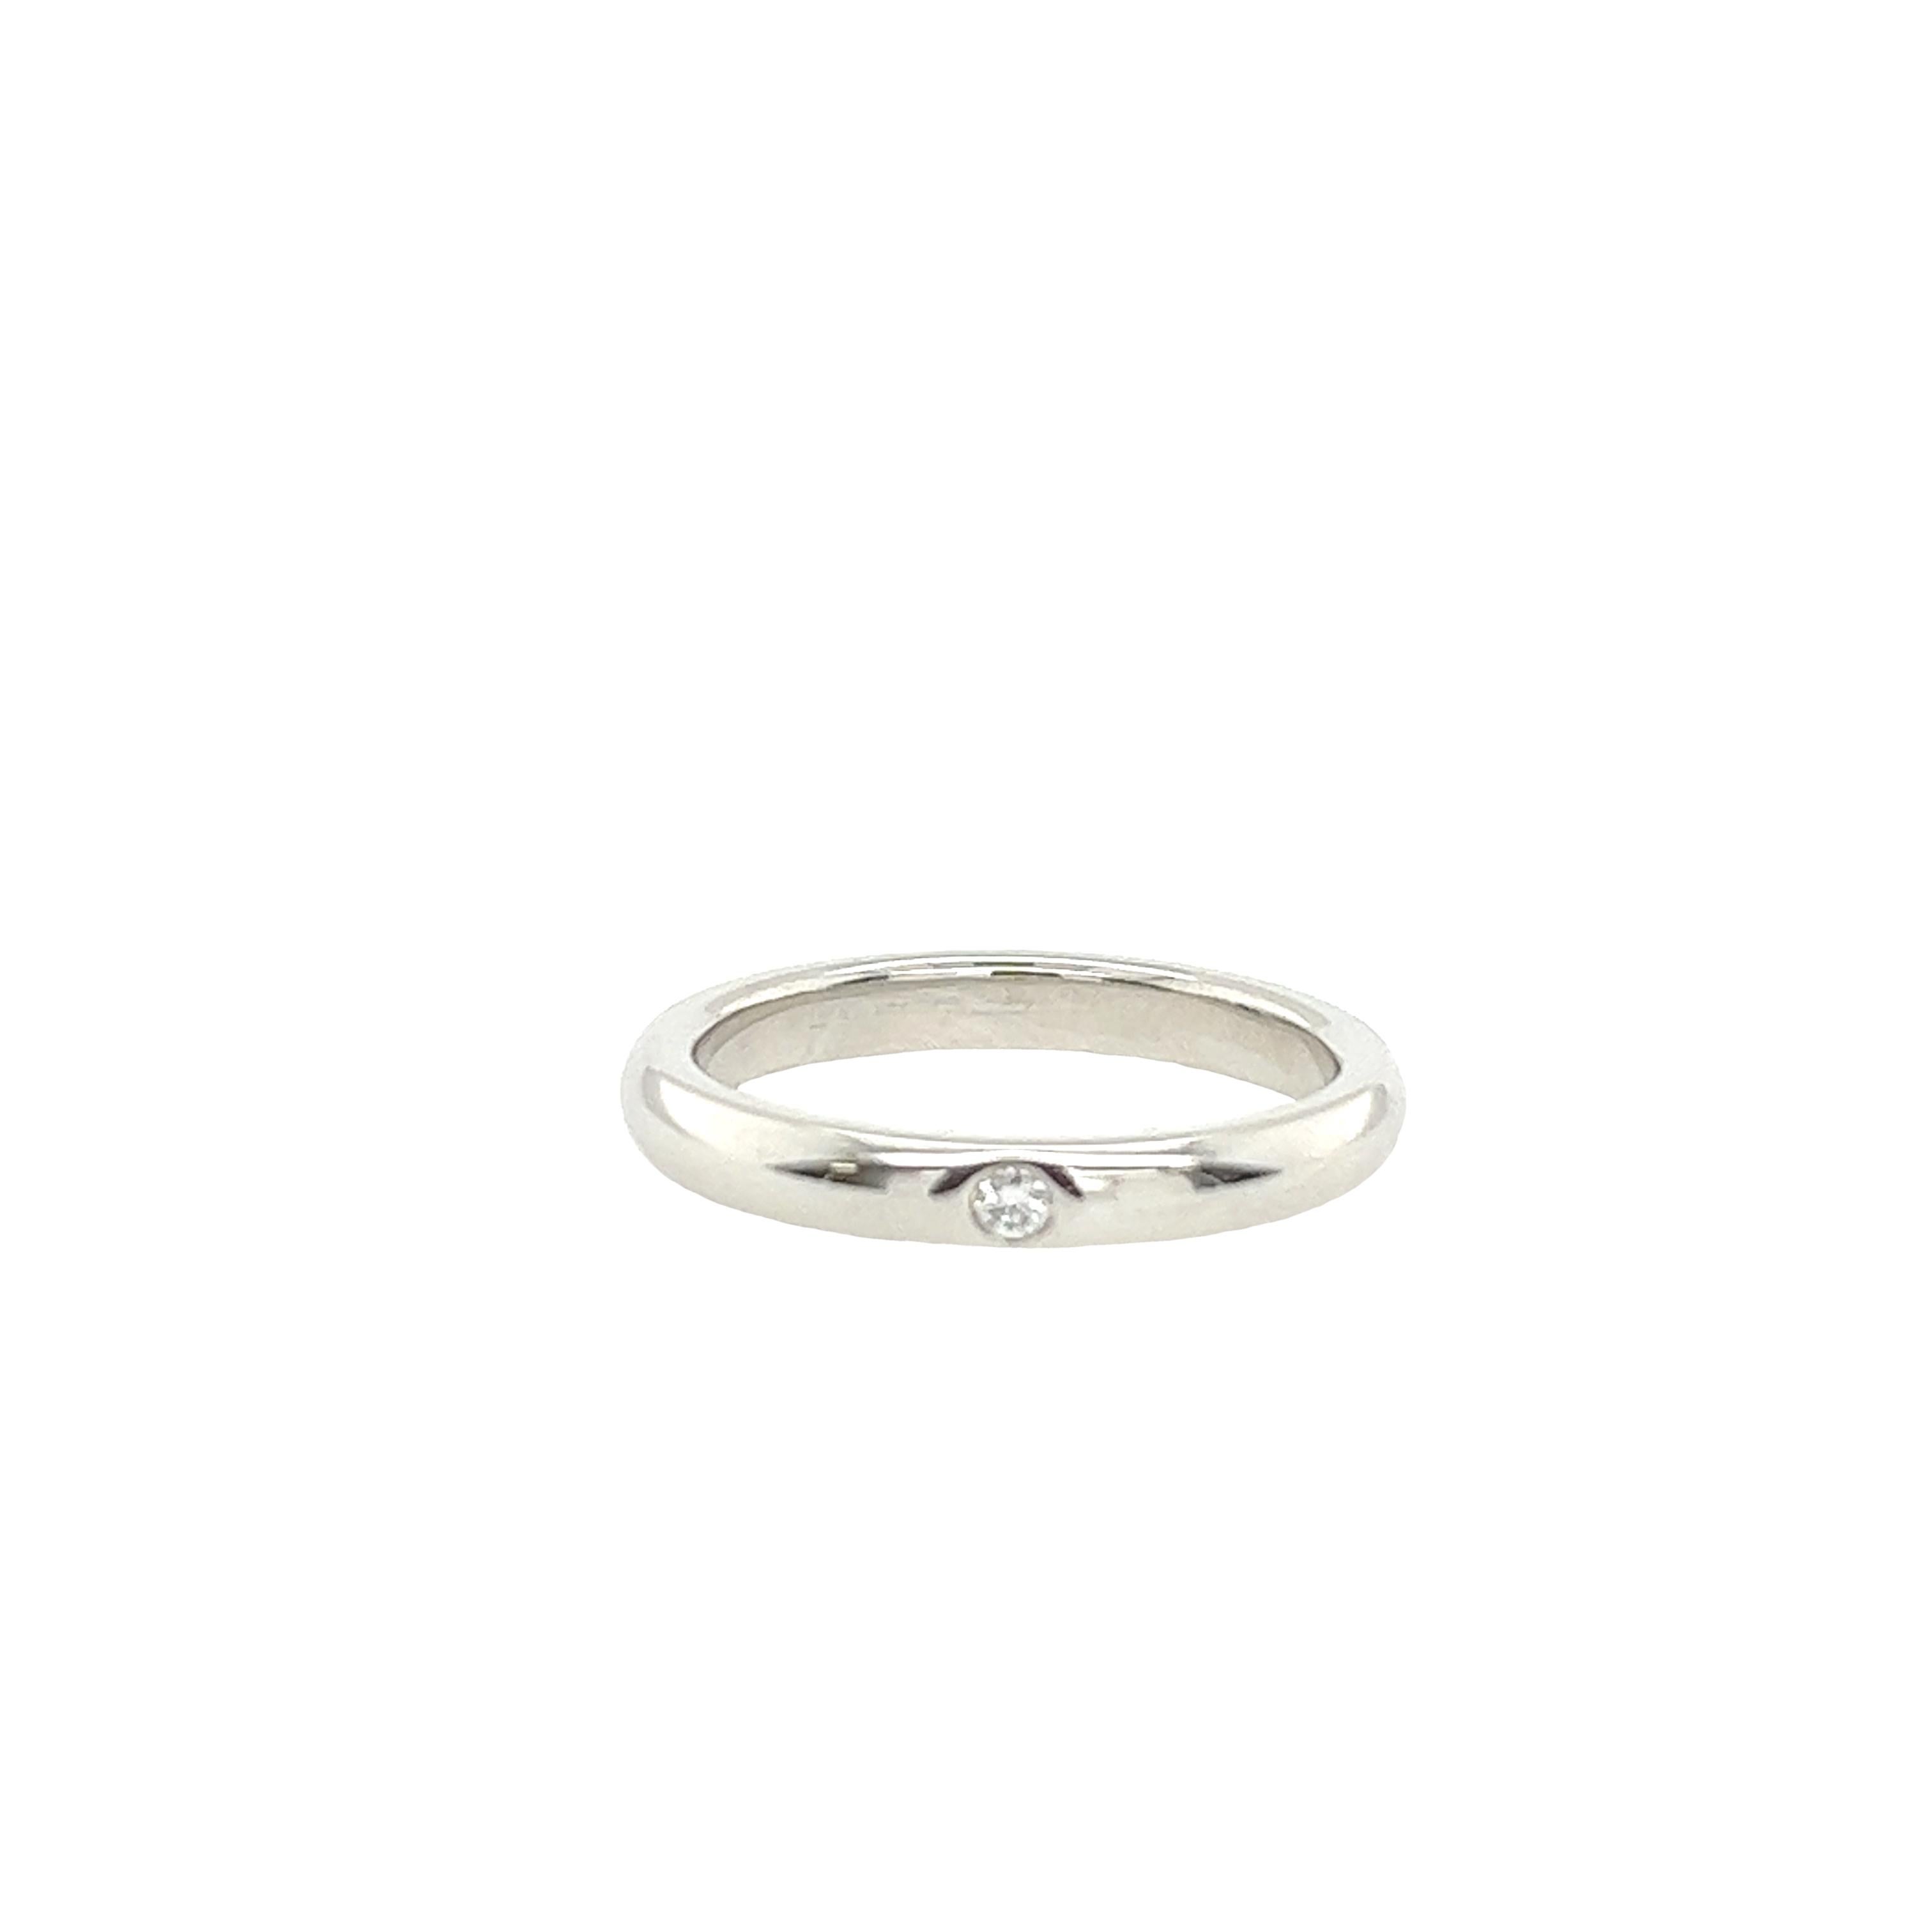 Tiffany & Co. Elsa Peretti Platinum 0.02ct Diamond ring embodies the timeless elegance and sophistication for which both Elsa Peretti and Tiffany & Co. are renowned. It's a piece that exudes understated luxury and can be cherished for a